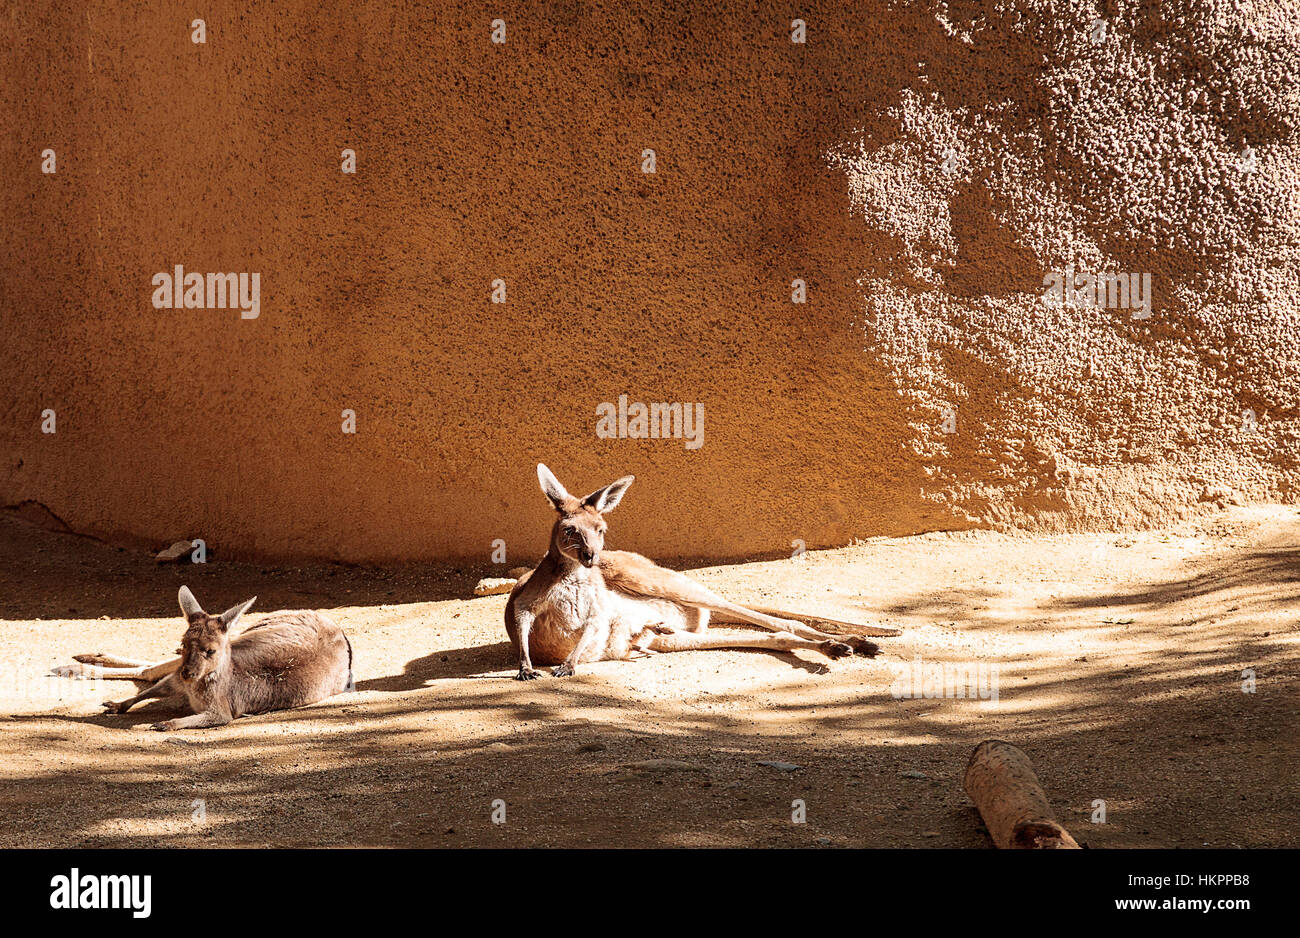 Kangaroo relaxes on the sand in front of rocks. Stock Photo